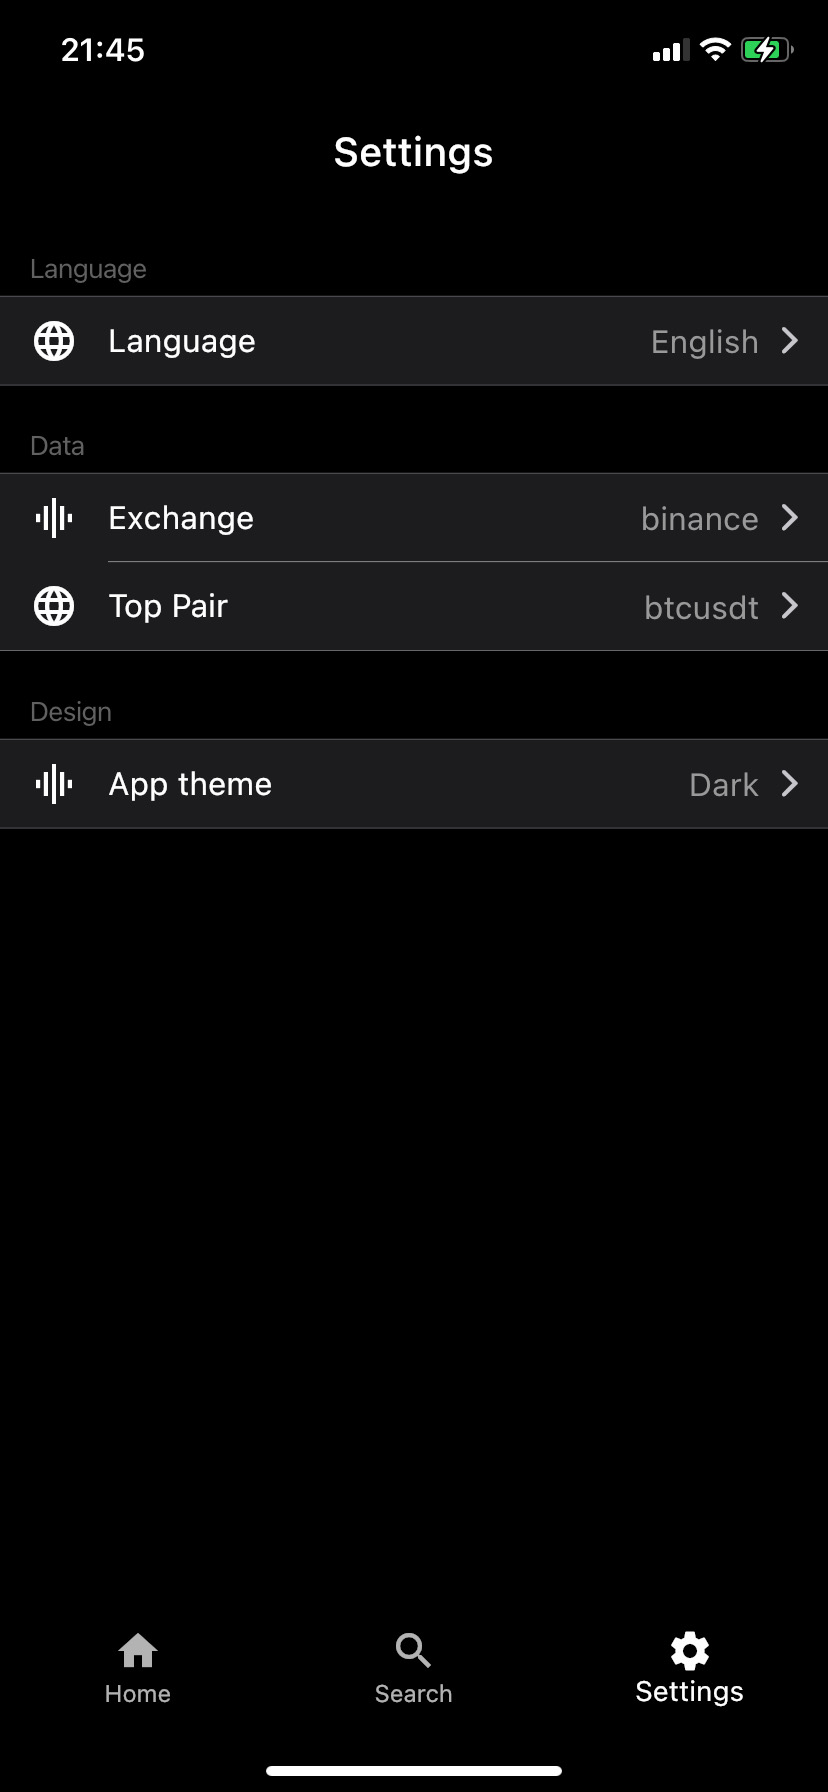 Flutter Cryptocurrency App with Riverpod & Freezed + Dio for API REST